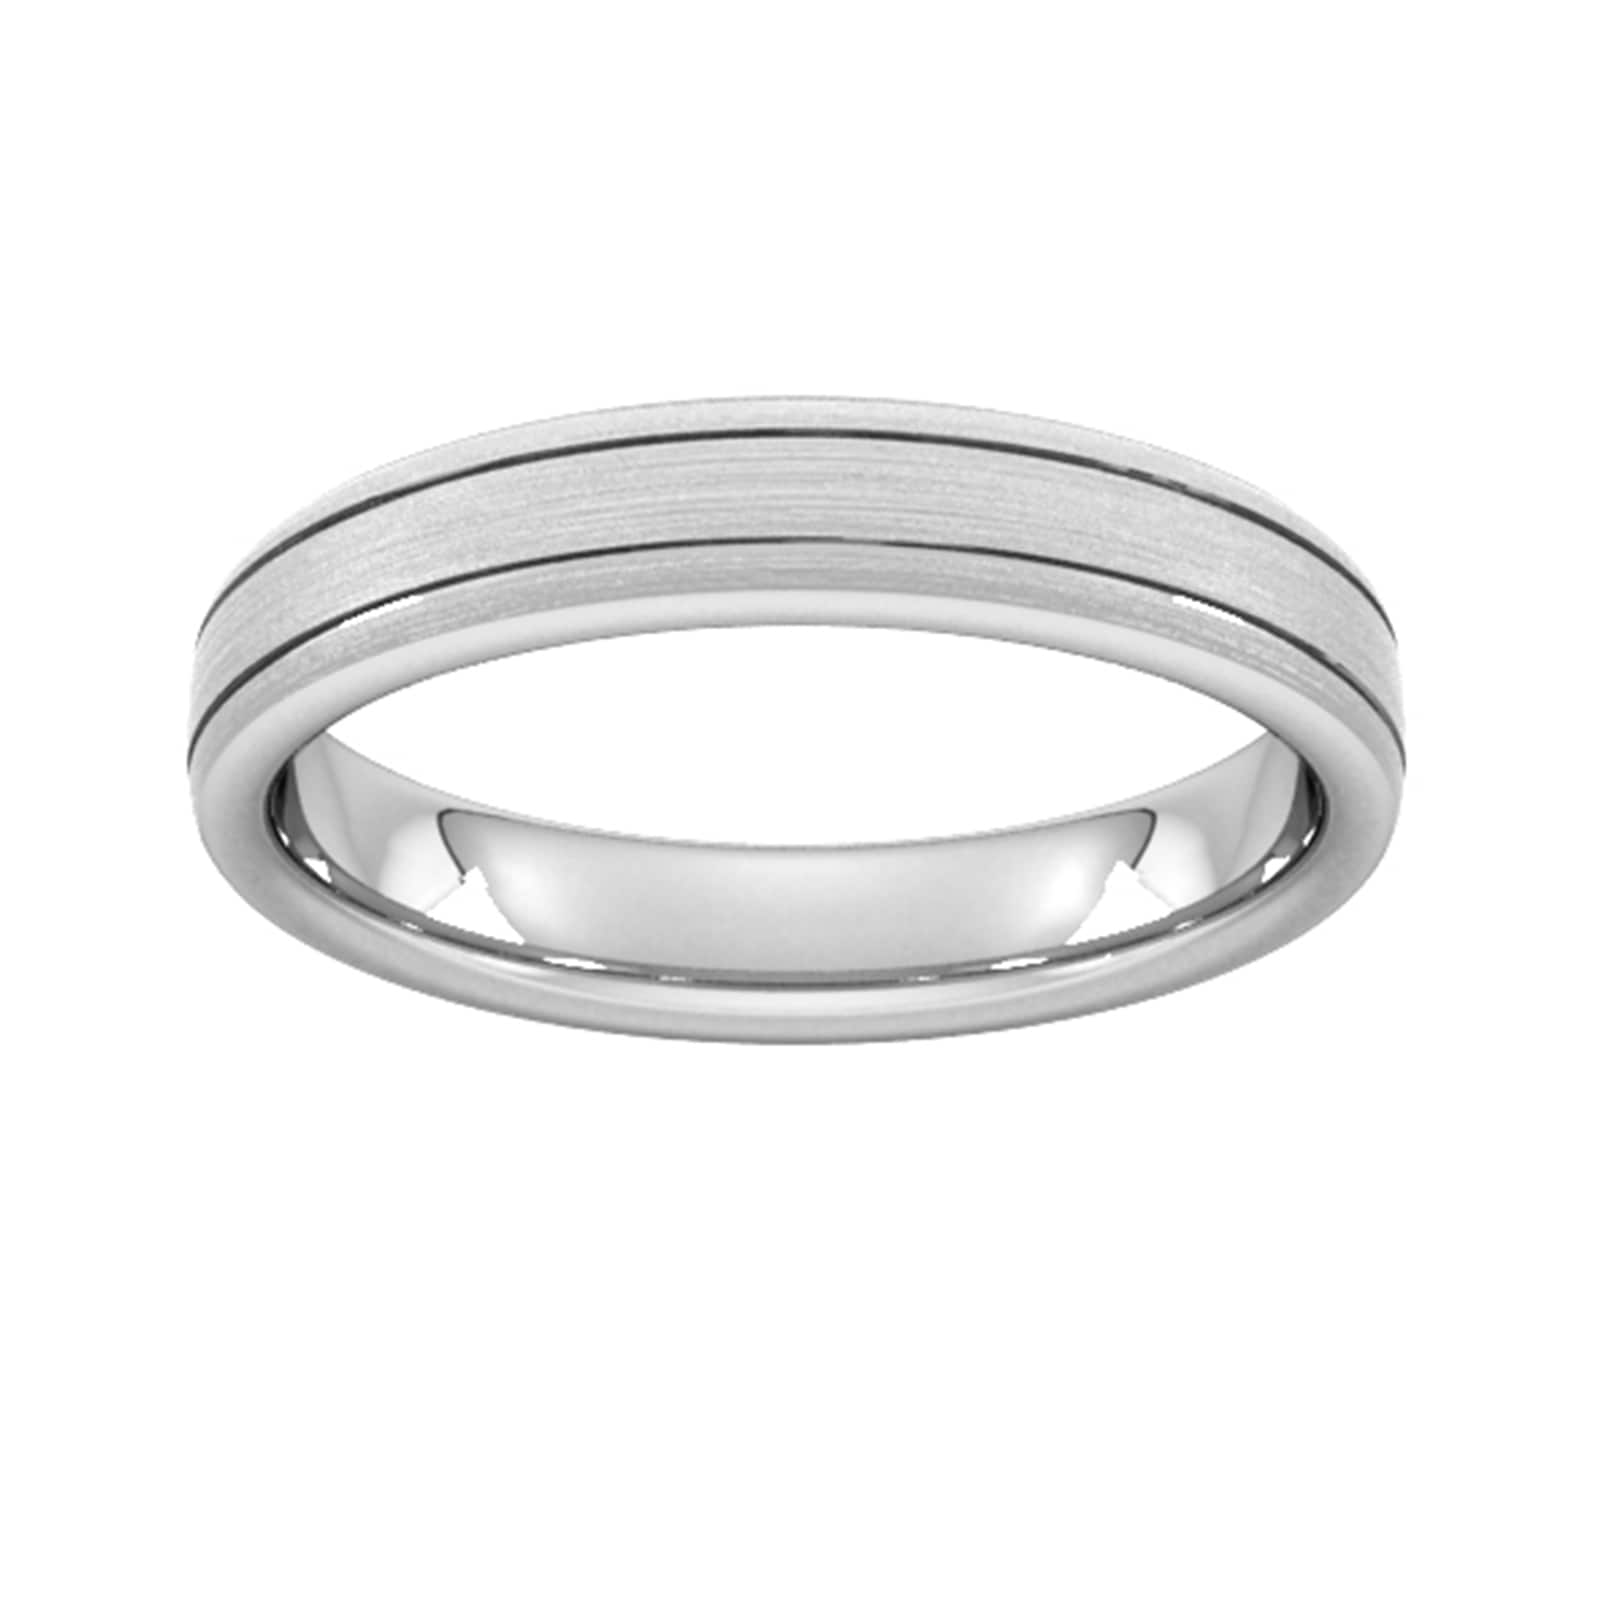 4mm Traditional Court Heavy Matt Finish With Double Grooves Wedding Ring In 9 Carat White Gold - Ring Size N